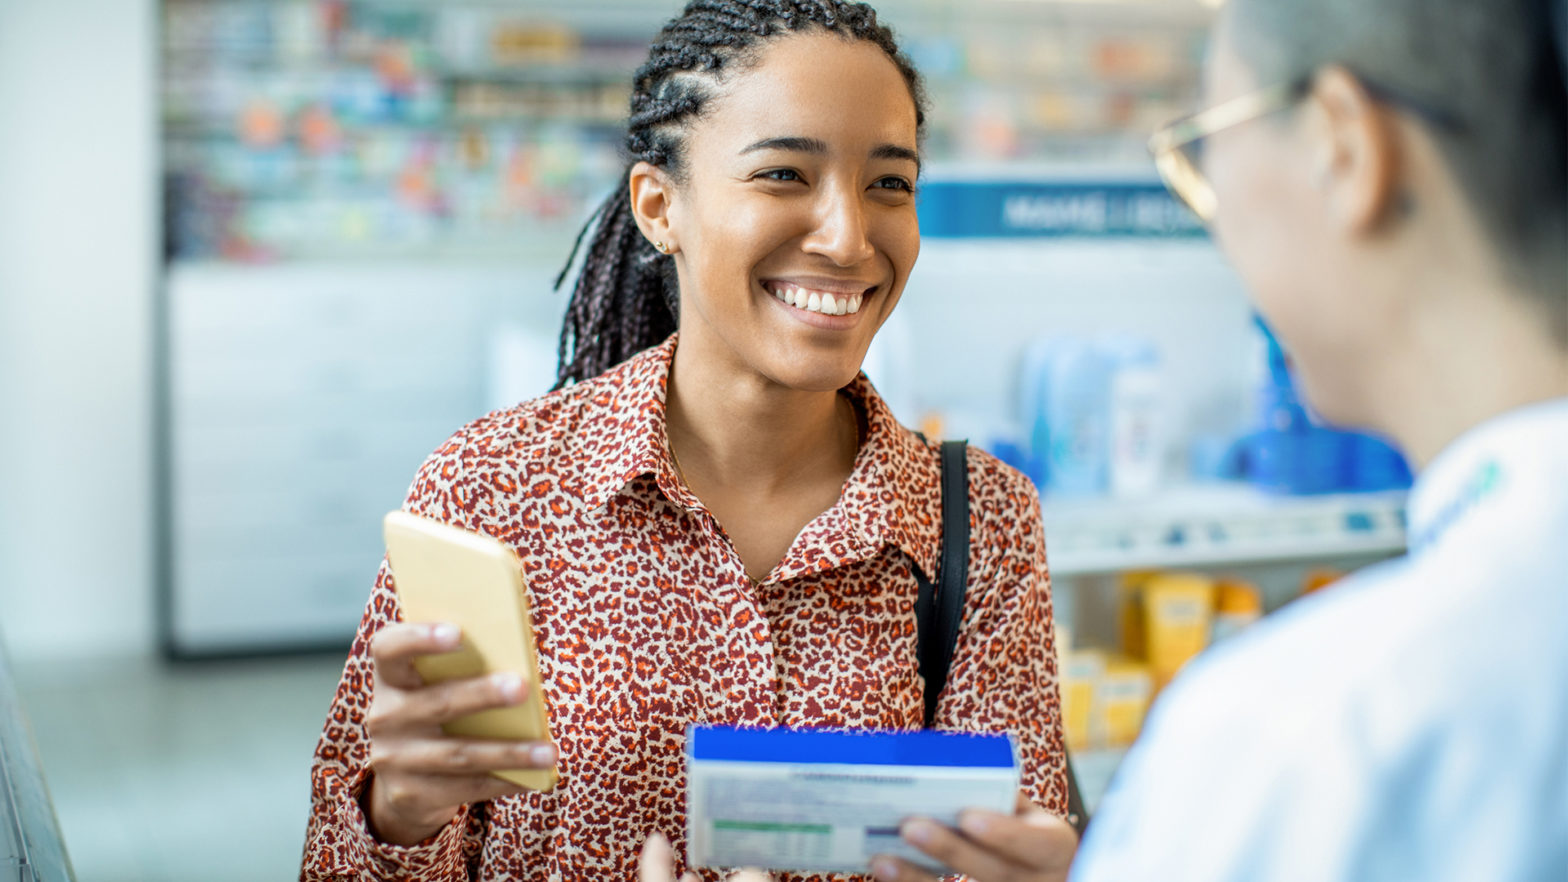 Amazon Pharmacy To Provide Accessibility To Prescription Drugs For Less — Here's How